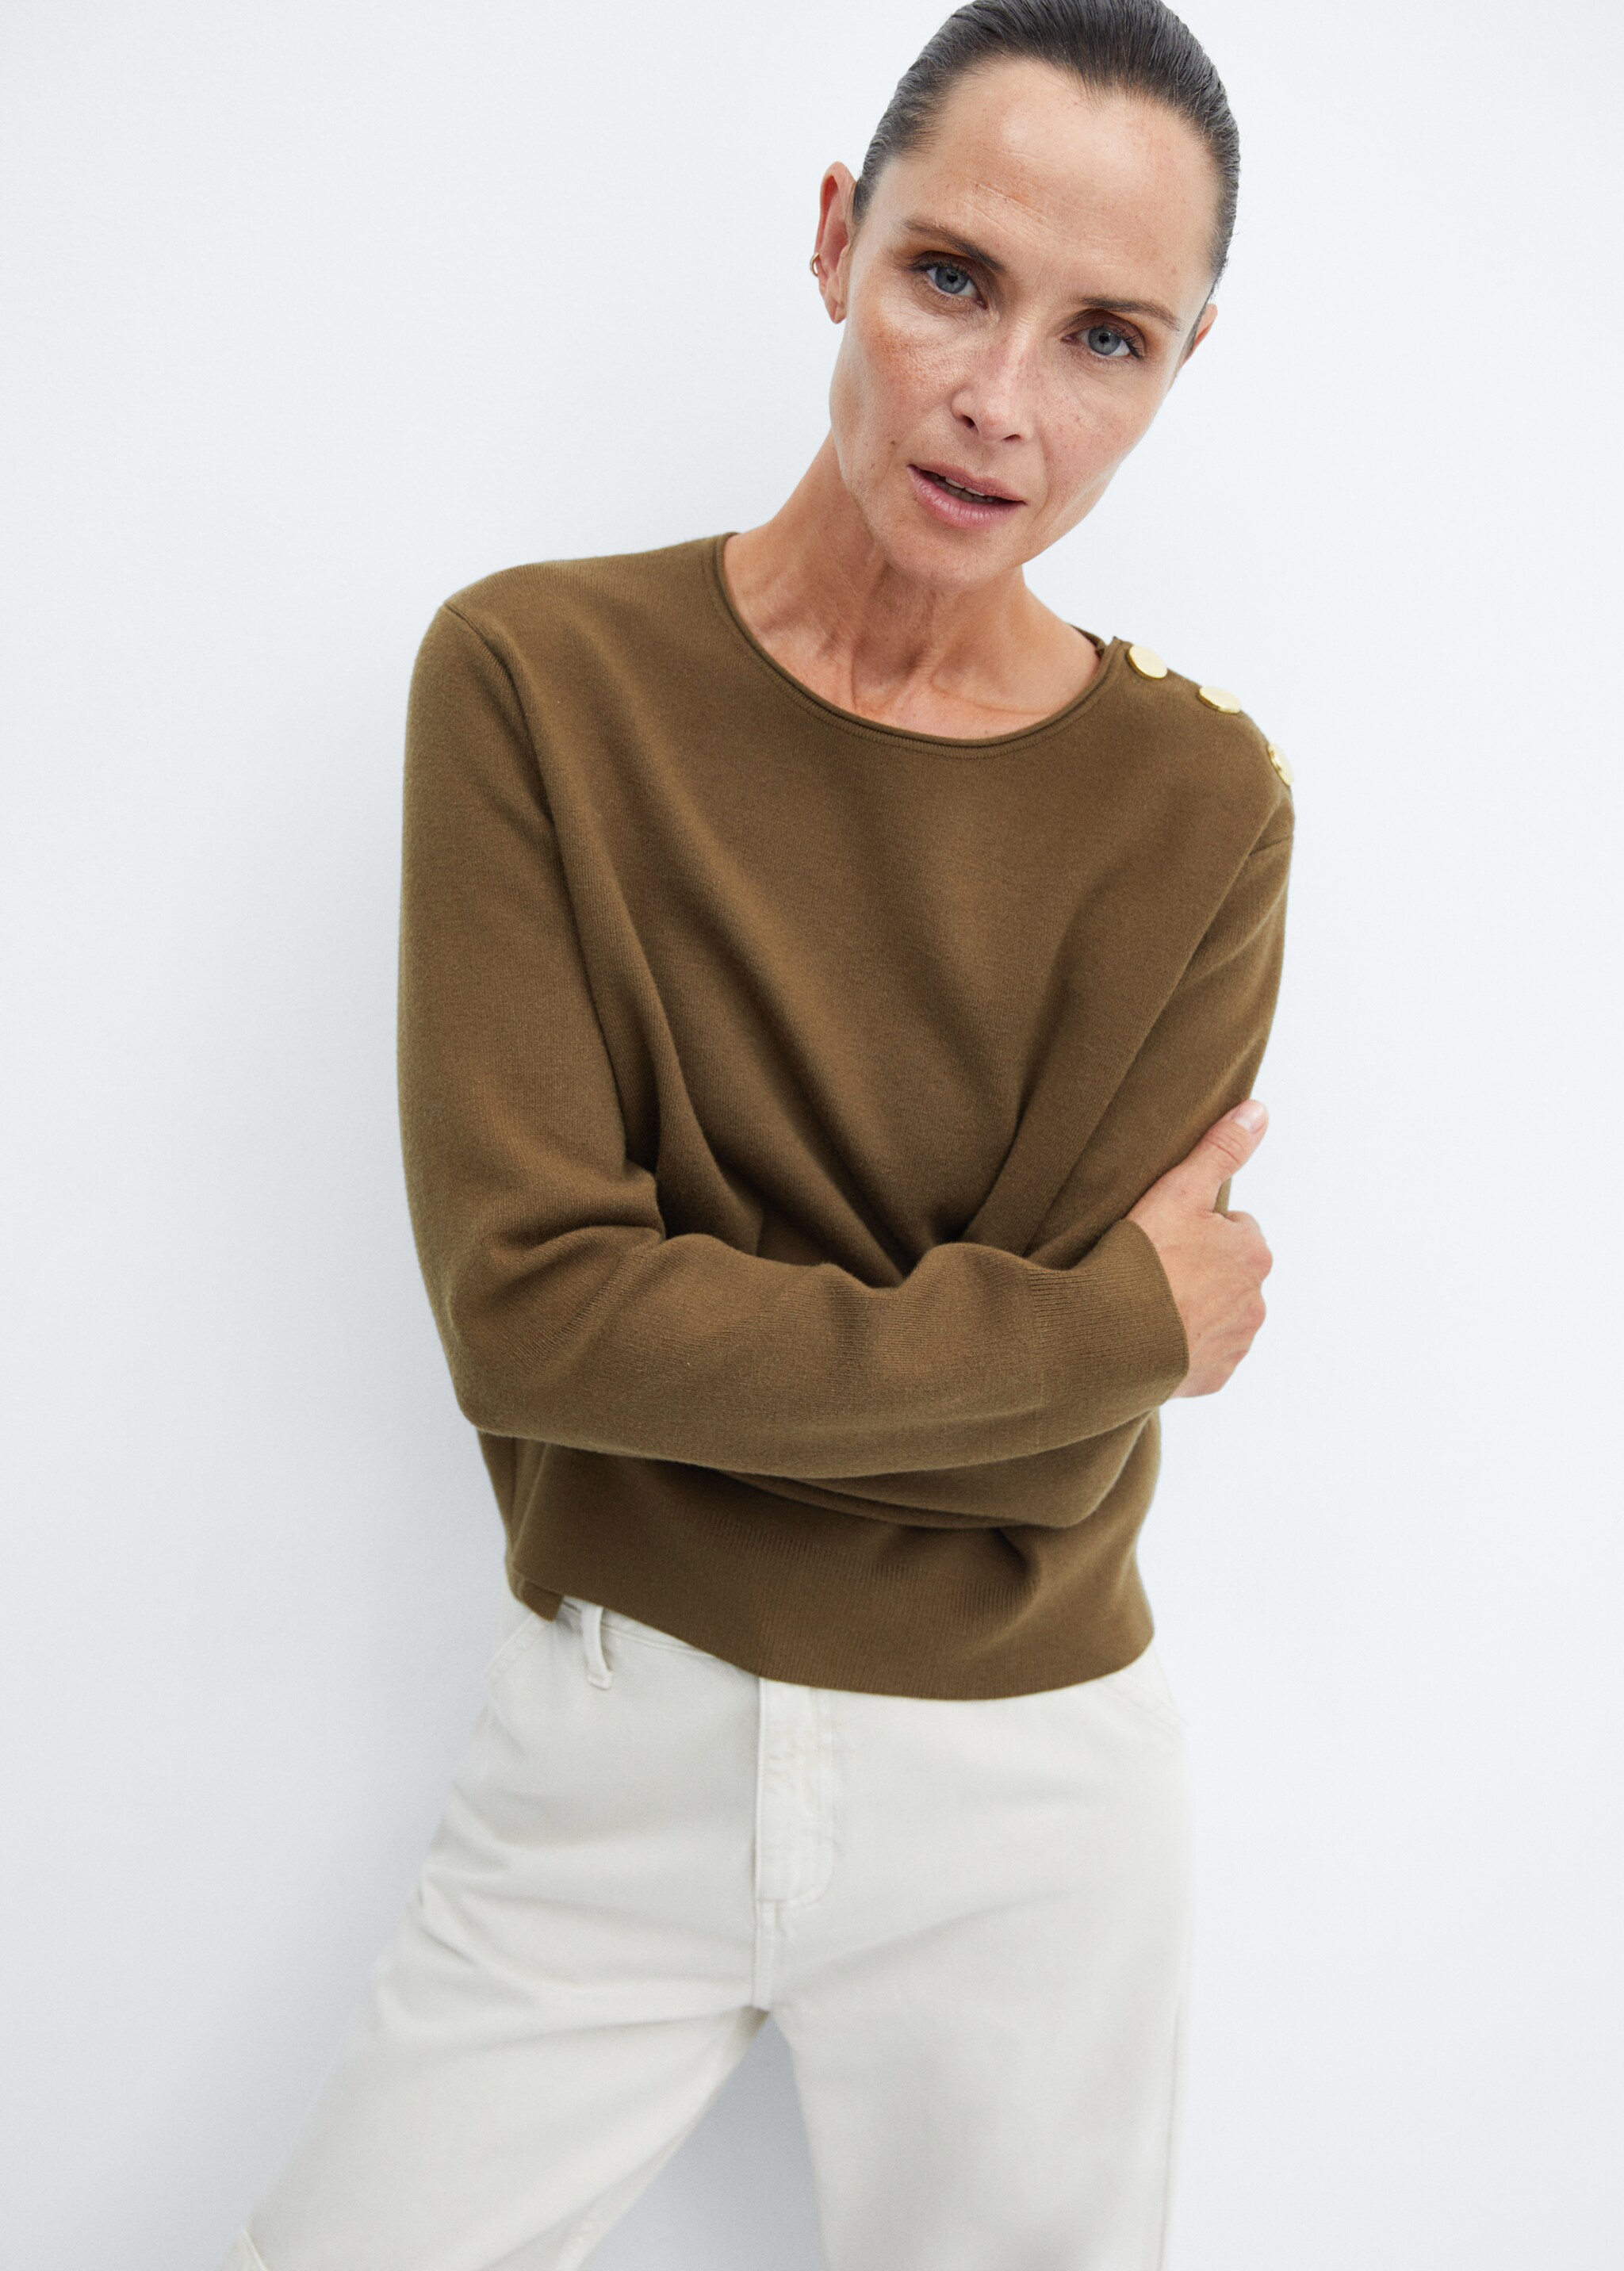 Sweater with shoulder buttons  - Medium plane